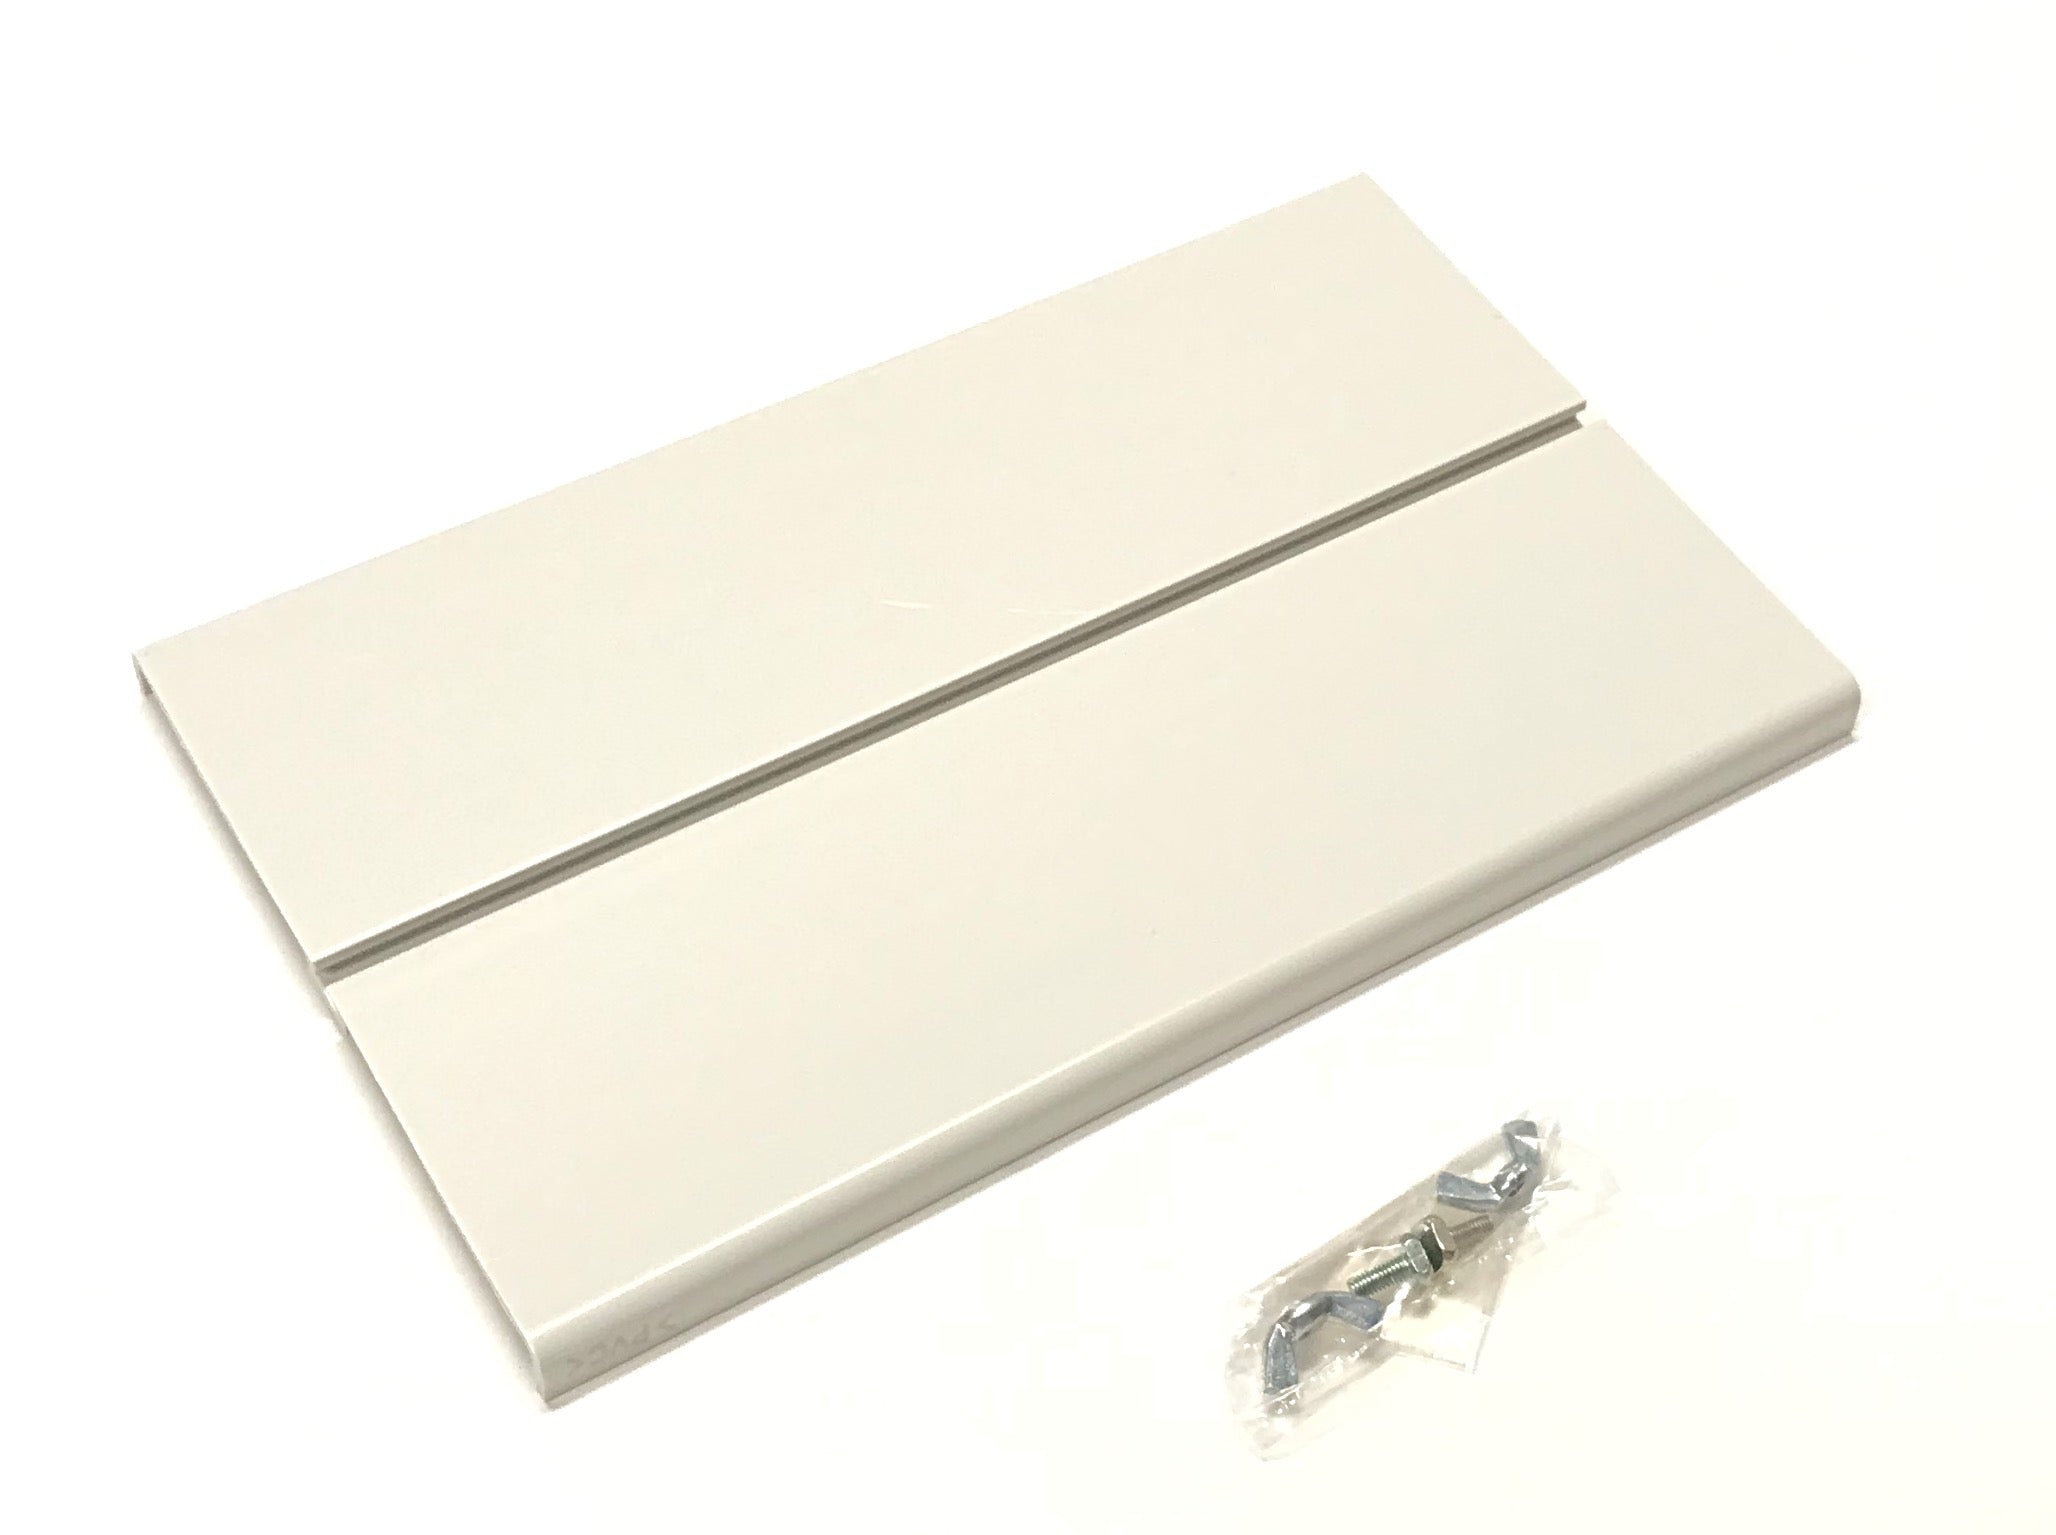 OEM Delonghi Air Conditioner AC 9-7/8 Inch Window Slider Extension Originally Shipped With PACEX390LN3ALBK